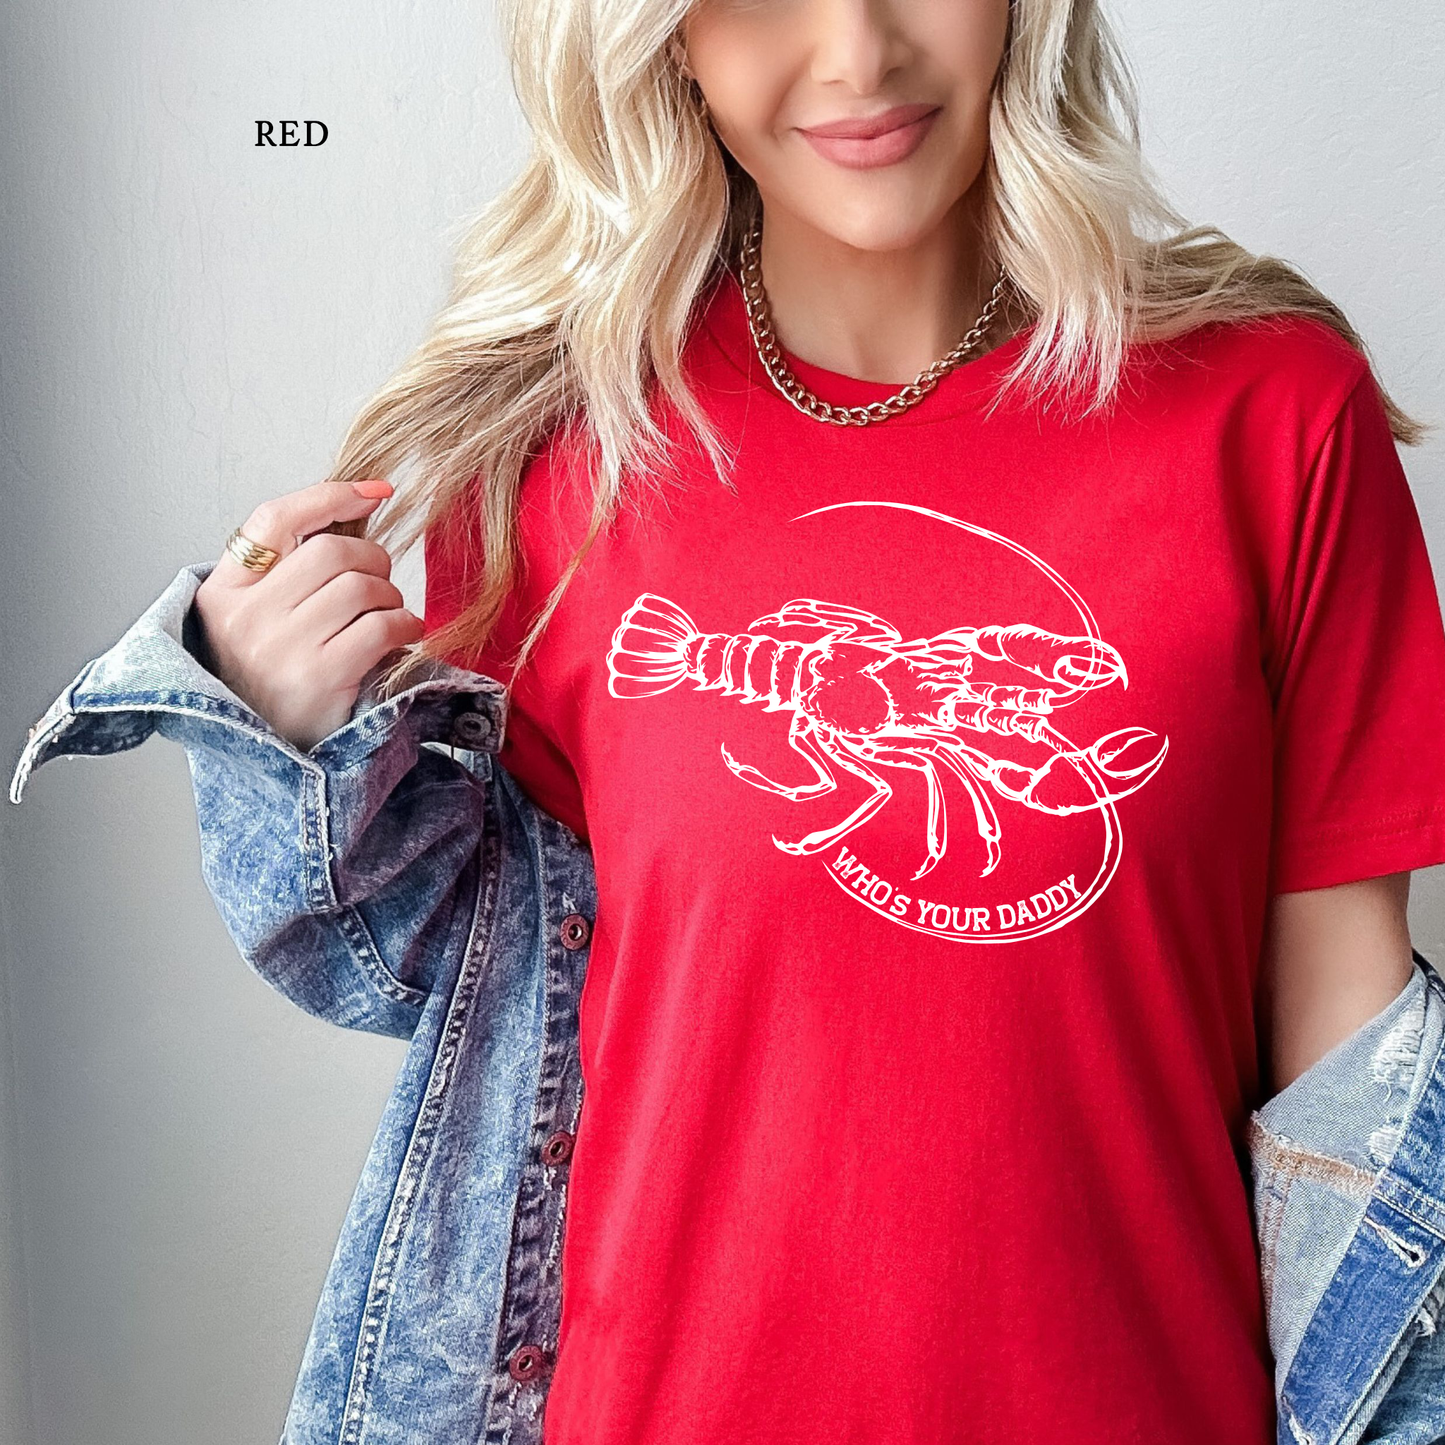 Who's Your (Craw) Daddy | Crawfish | Funny Graphic Tee